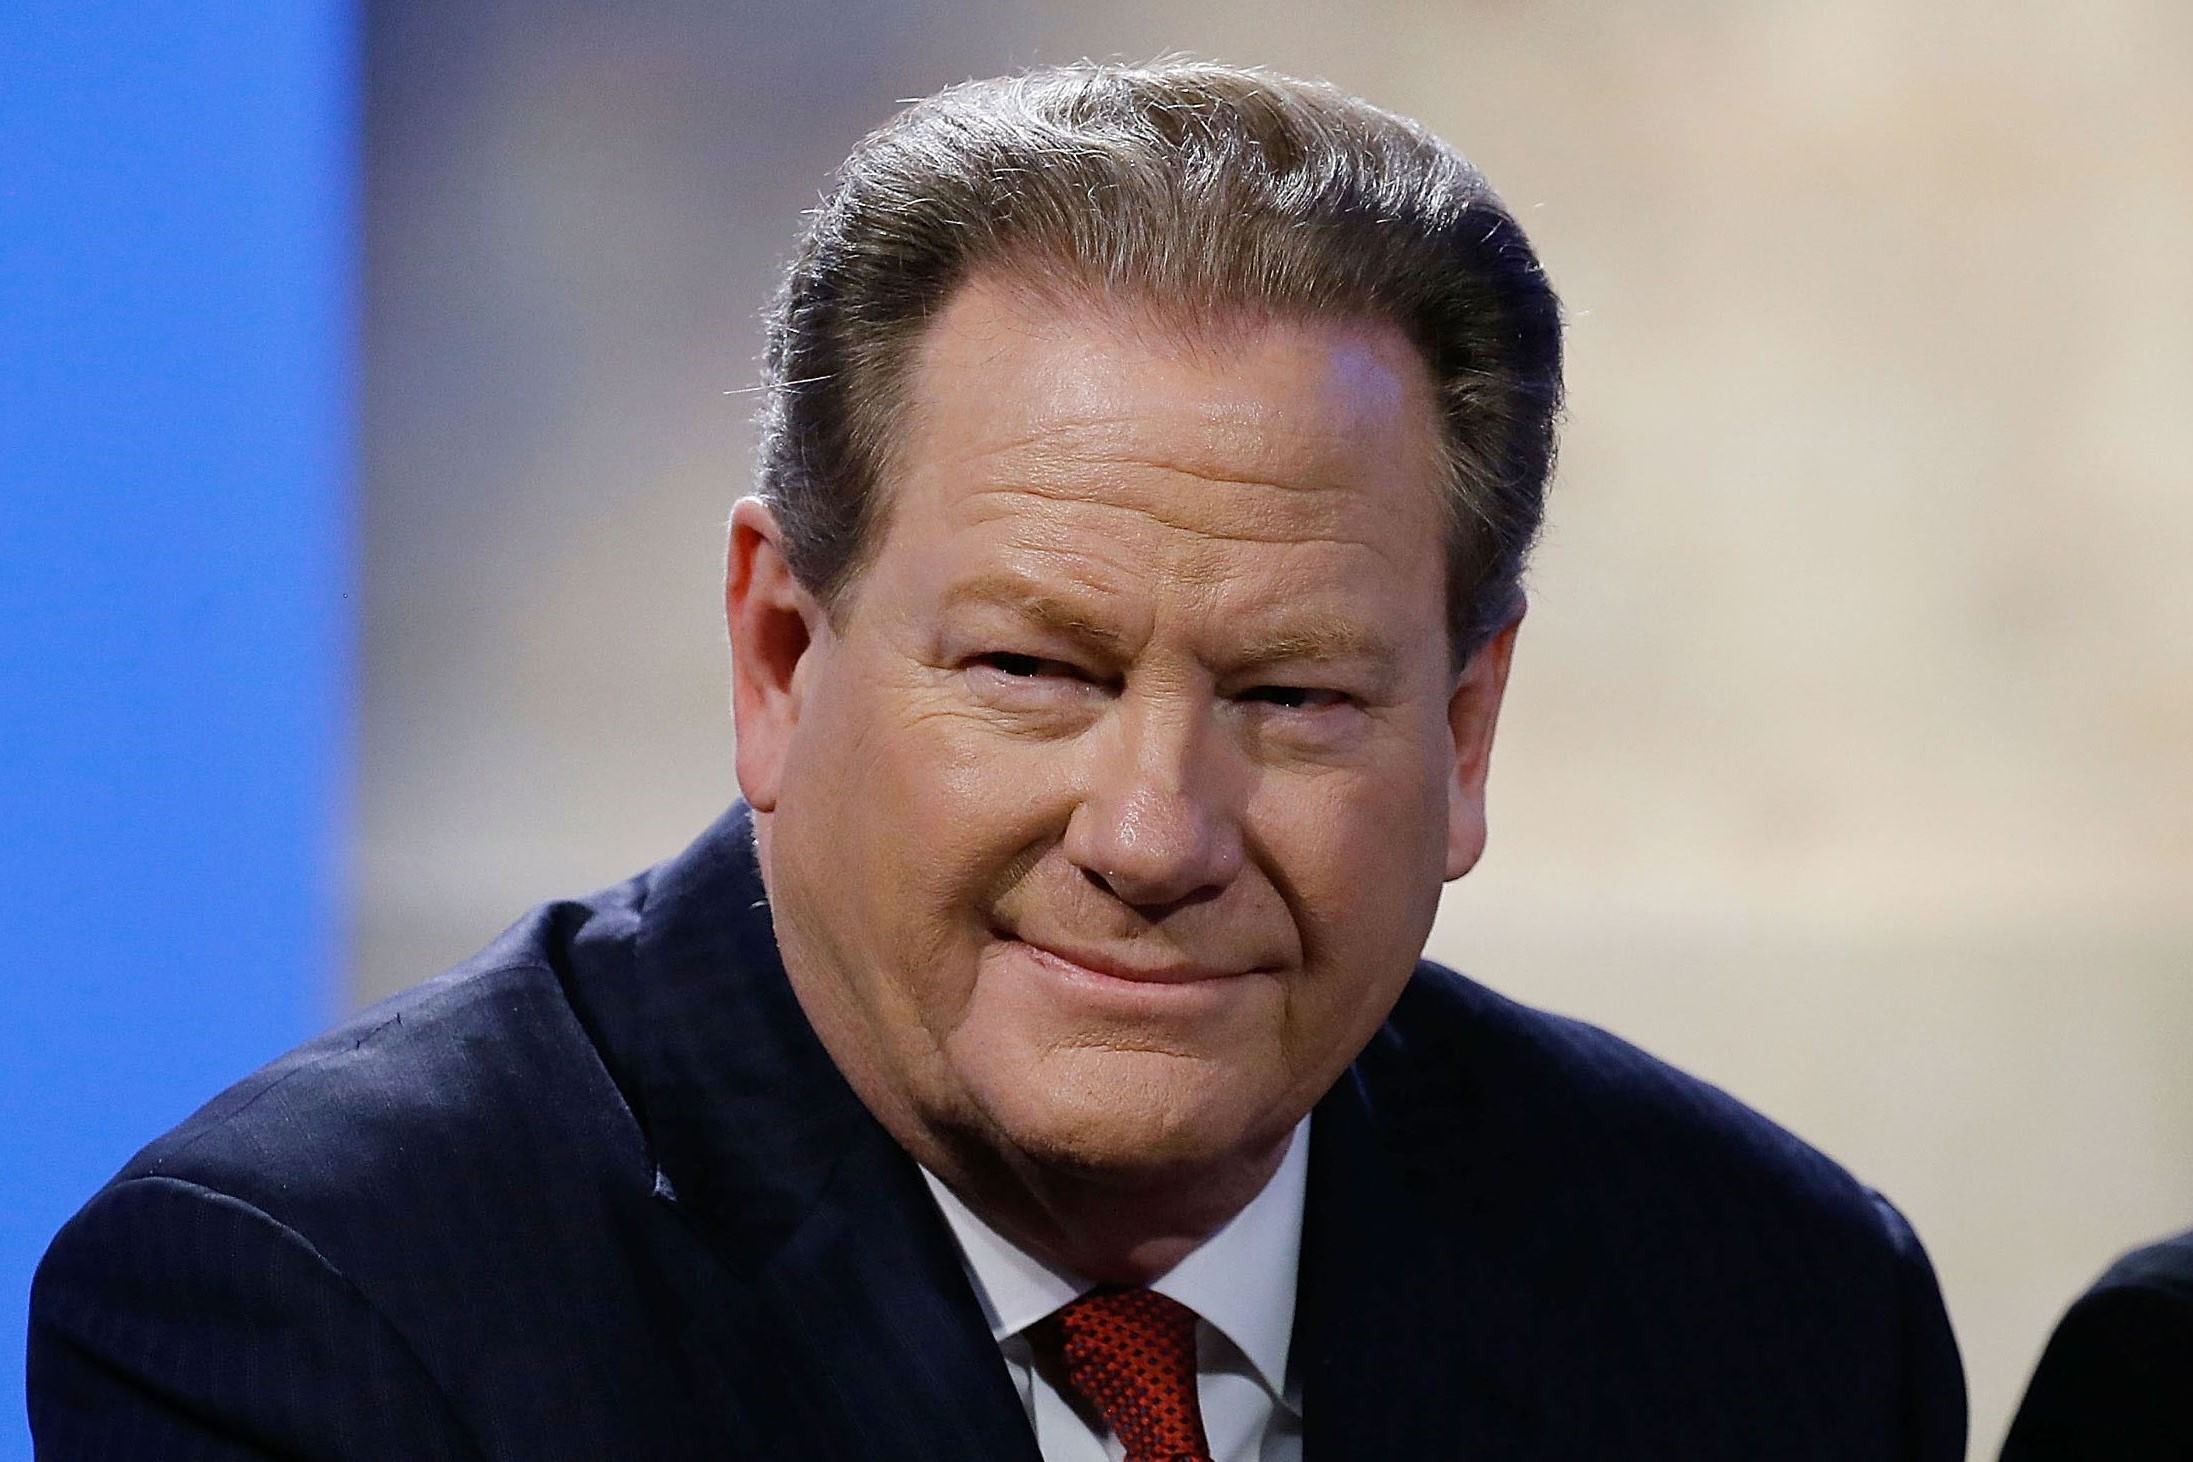 14 Captivating Facts About Ed Schultz - Facts.net